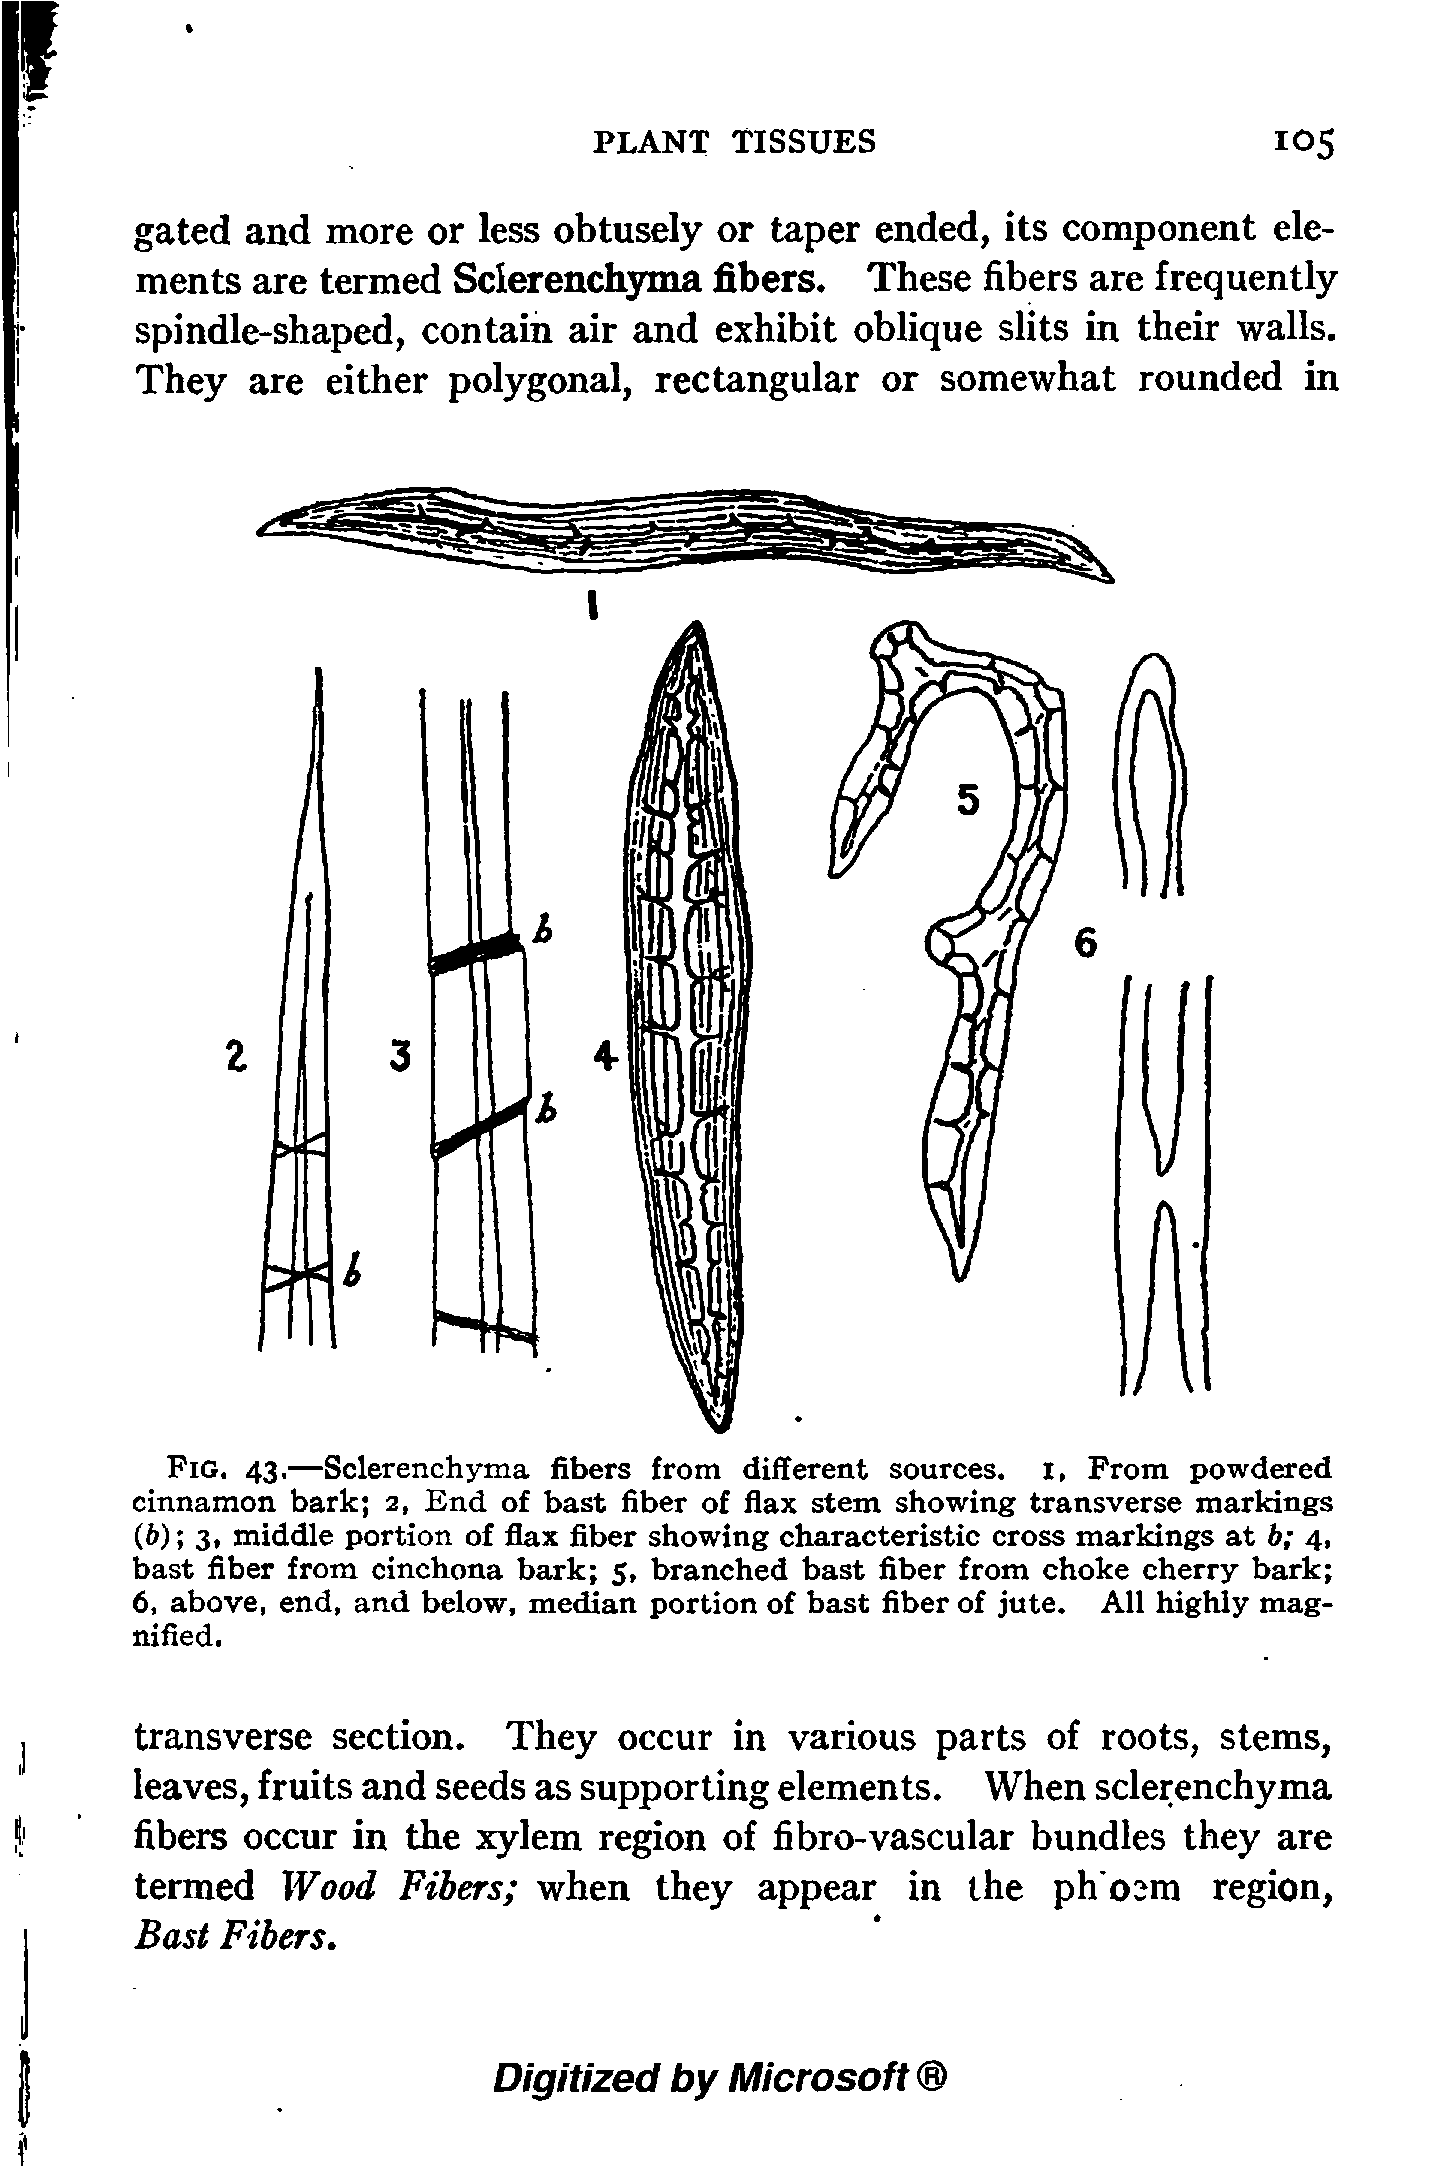 Fig. 43,—Sclerenchyma fibers from different sources, i, Prom powdered cinnamon bark 2, End of bast fiber of flax stem showing transverse markings (6) 3, middle portion of flax fiber showing characteristic cross markings at b 4, bast fiber from cinchona bark 5, branched bast fiber from choke cherry bark 6. above, end, and below, median portion of bast fiber of jute. All highly magnified.